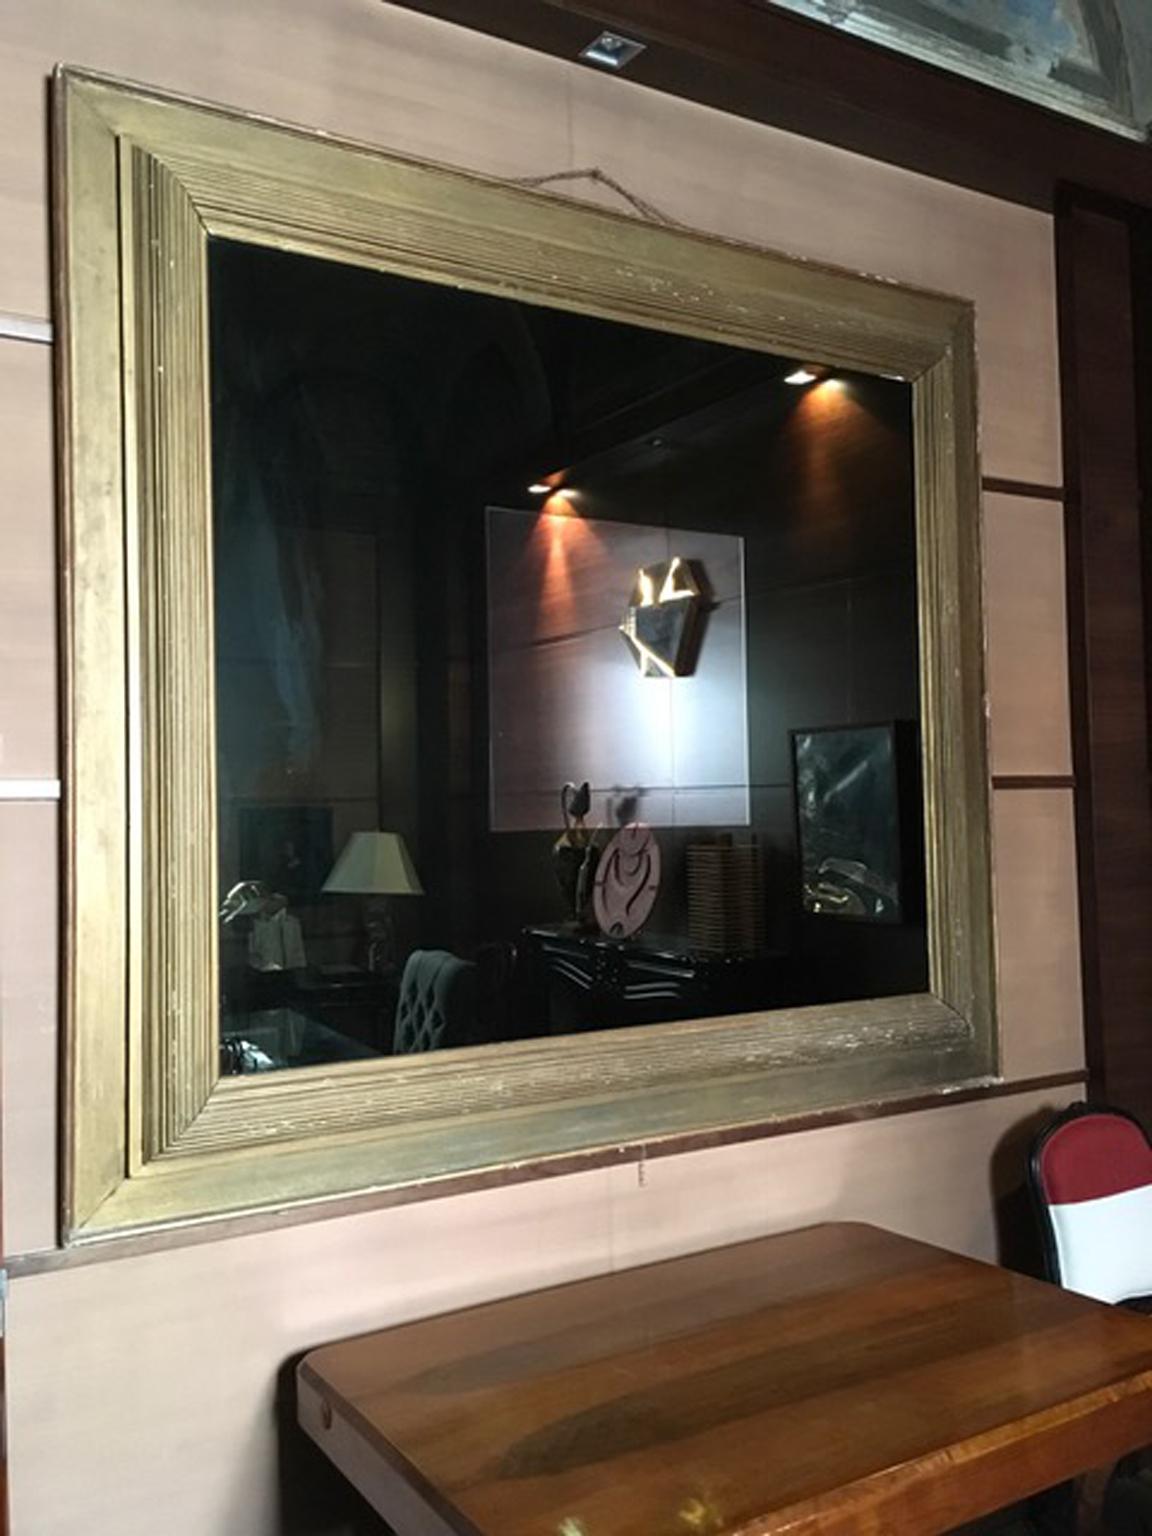 This stunning Post Modern mirror has a golden wood frame dated circa 1960. The giant smoked mirror has a clear mirror square in the center. The result is a one of a kind piece in Italian Postmodern style.

The golden wood frame it was no restored